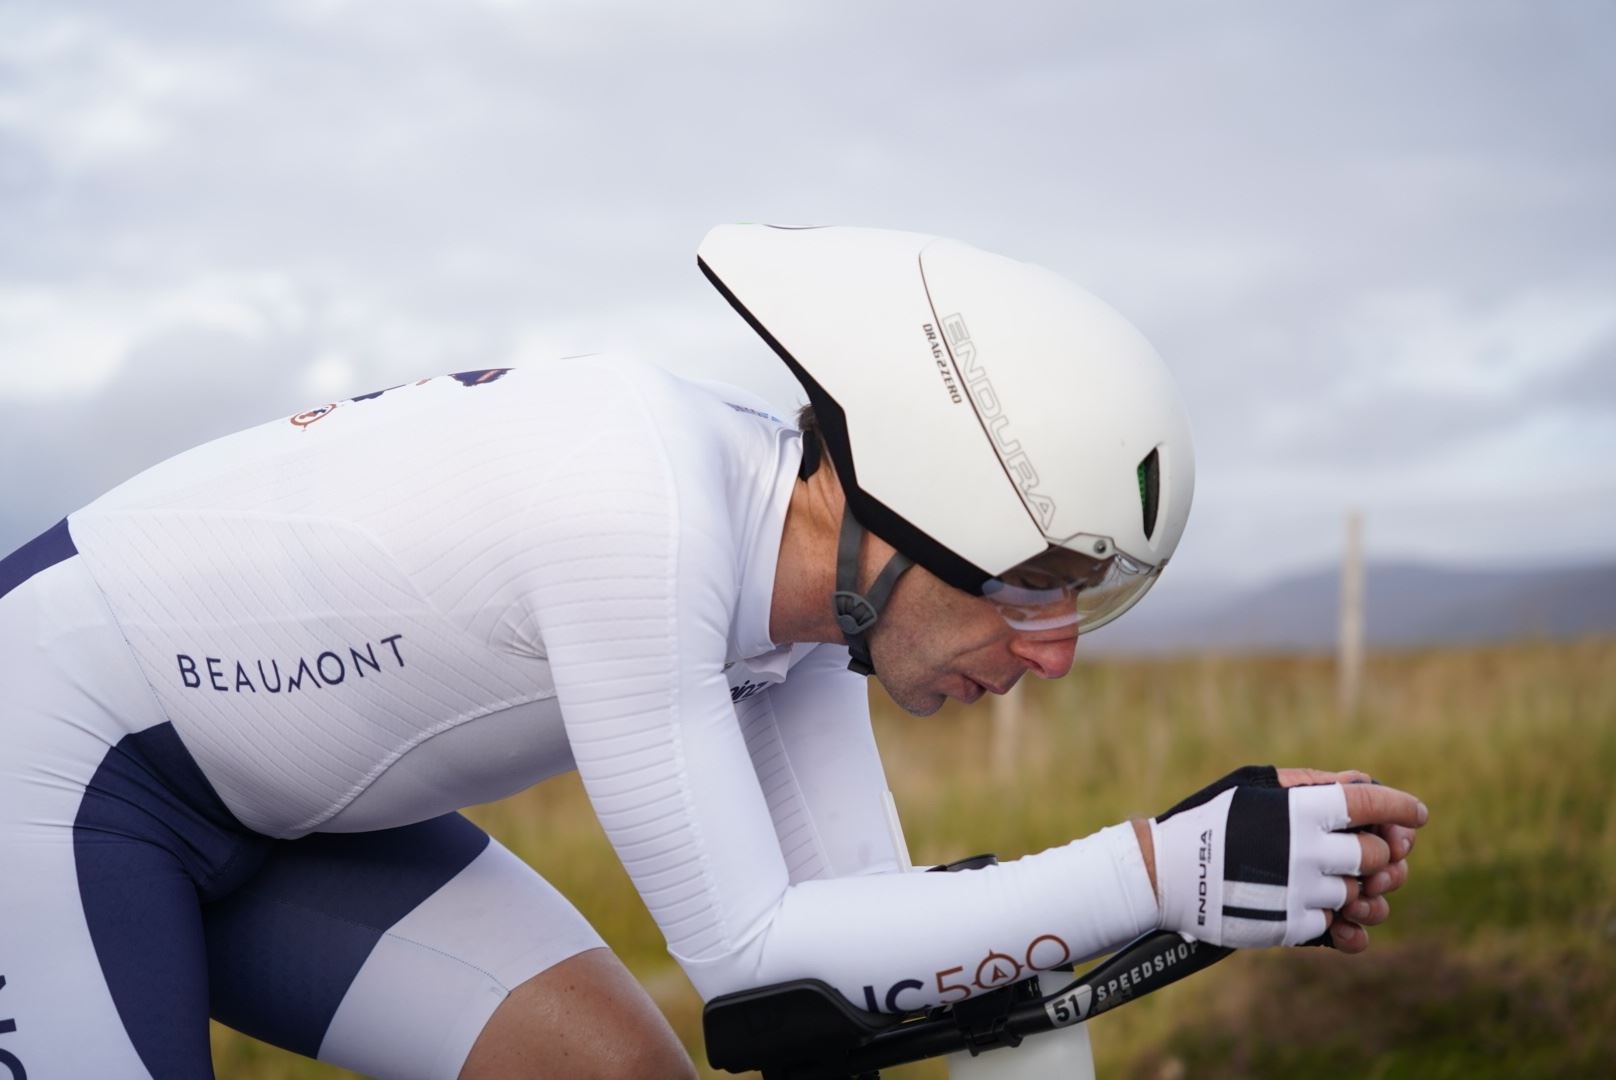 The determination to break the NC500 record set last year by Durness native Robbie Mitchell is plain to see on Mark Beaumont's face. Picture: Markus Stitz